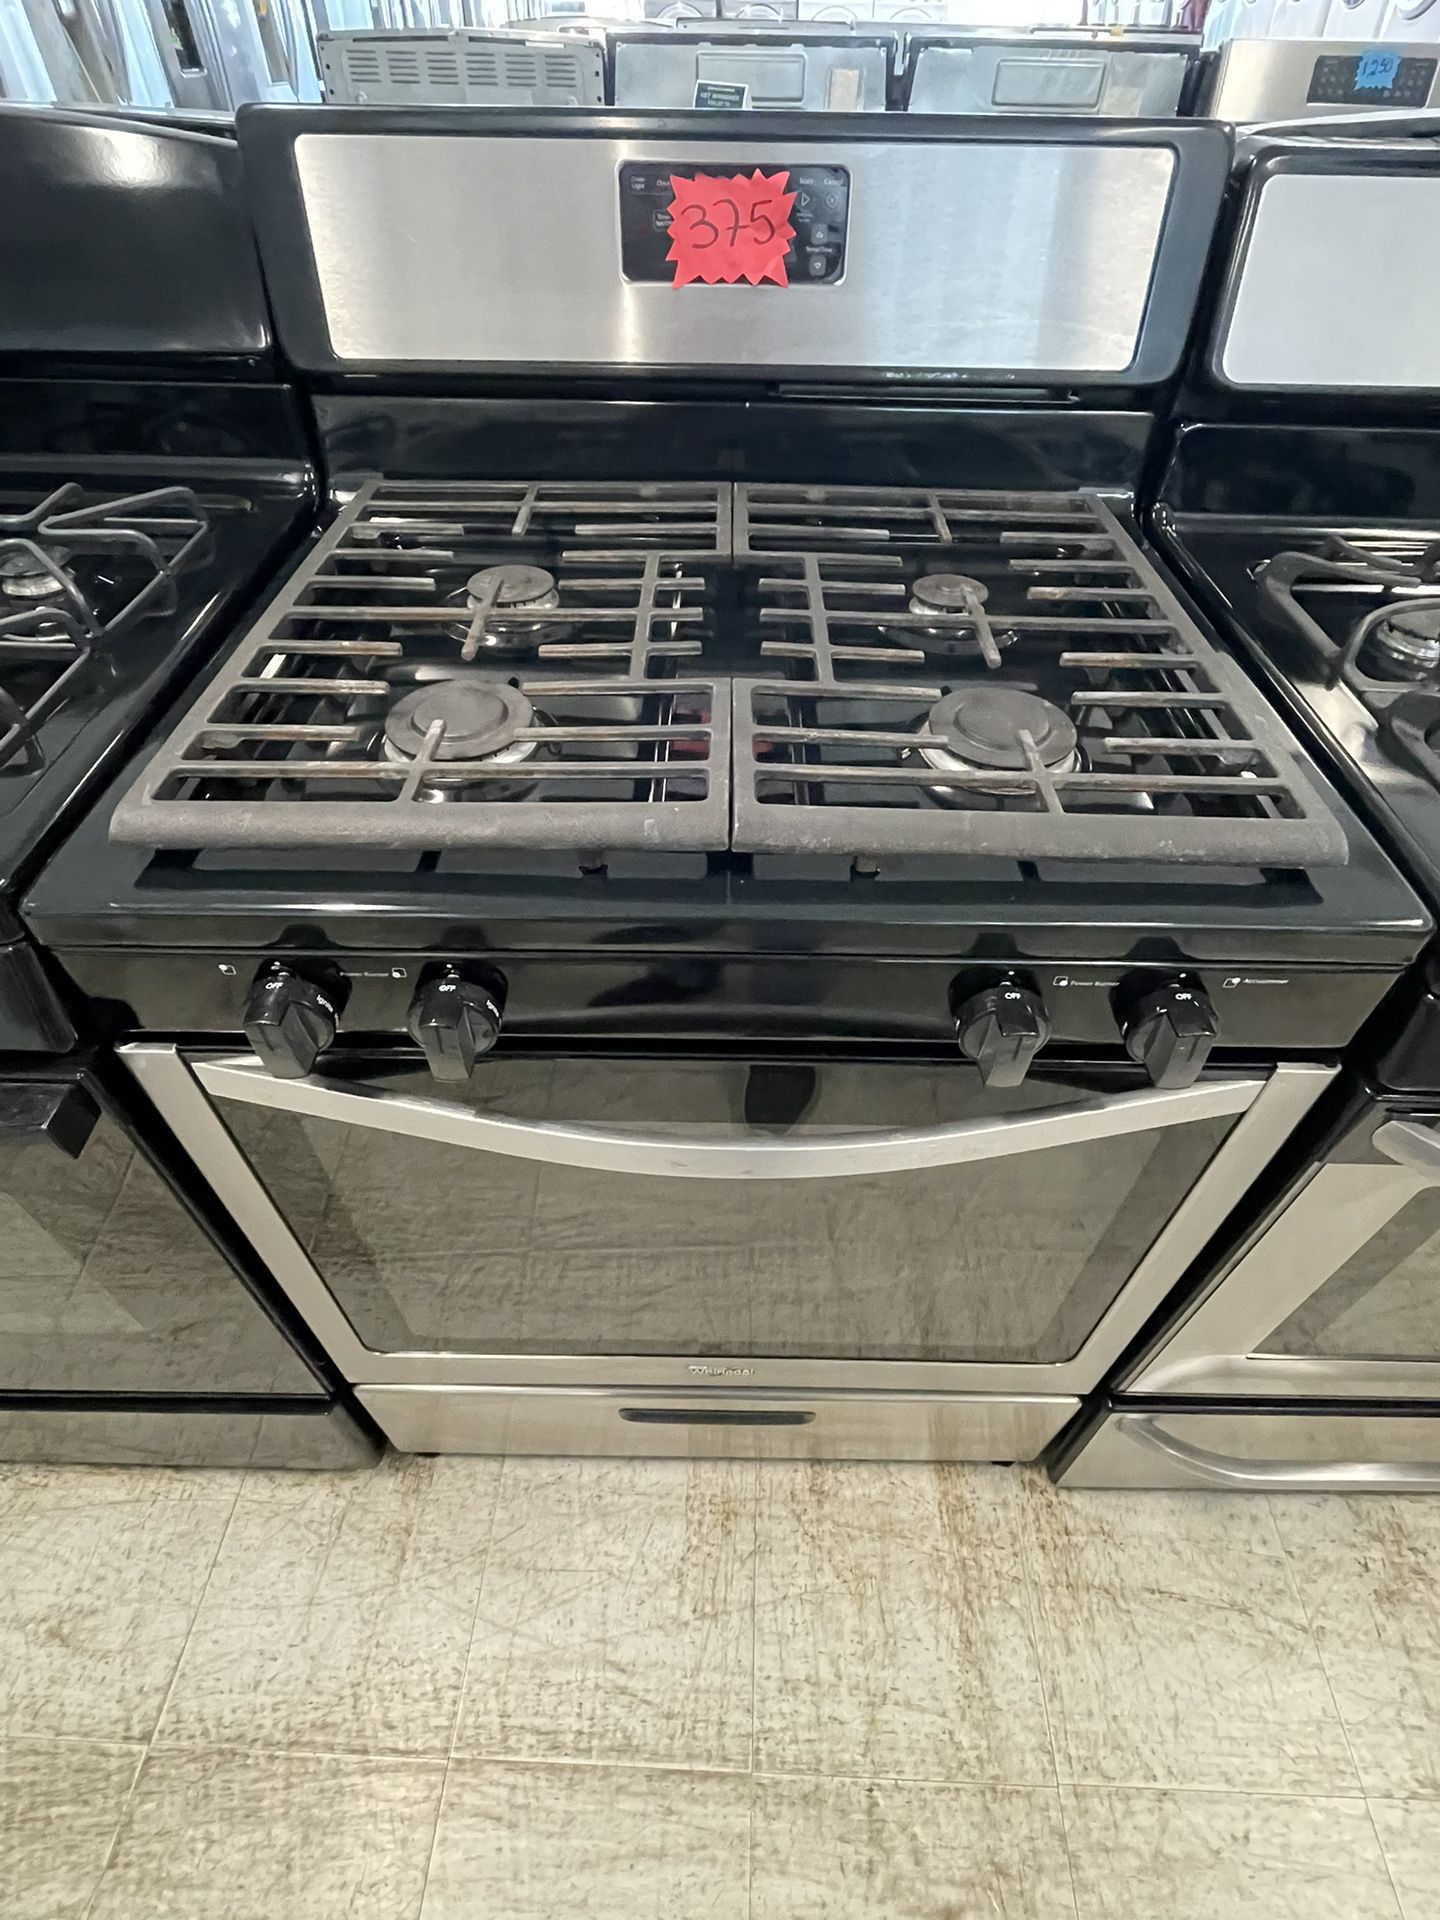 Whirlpool Gas Range Stove Used In Good Condition With 90days Warranty 